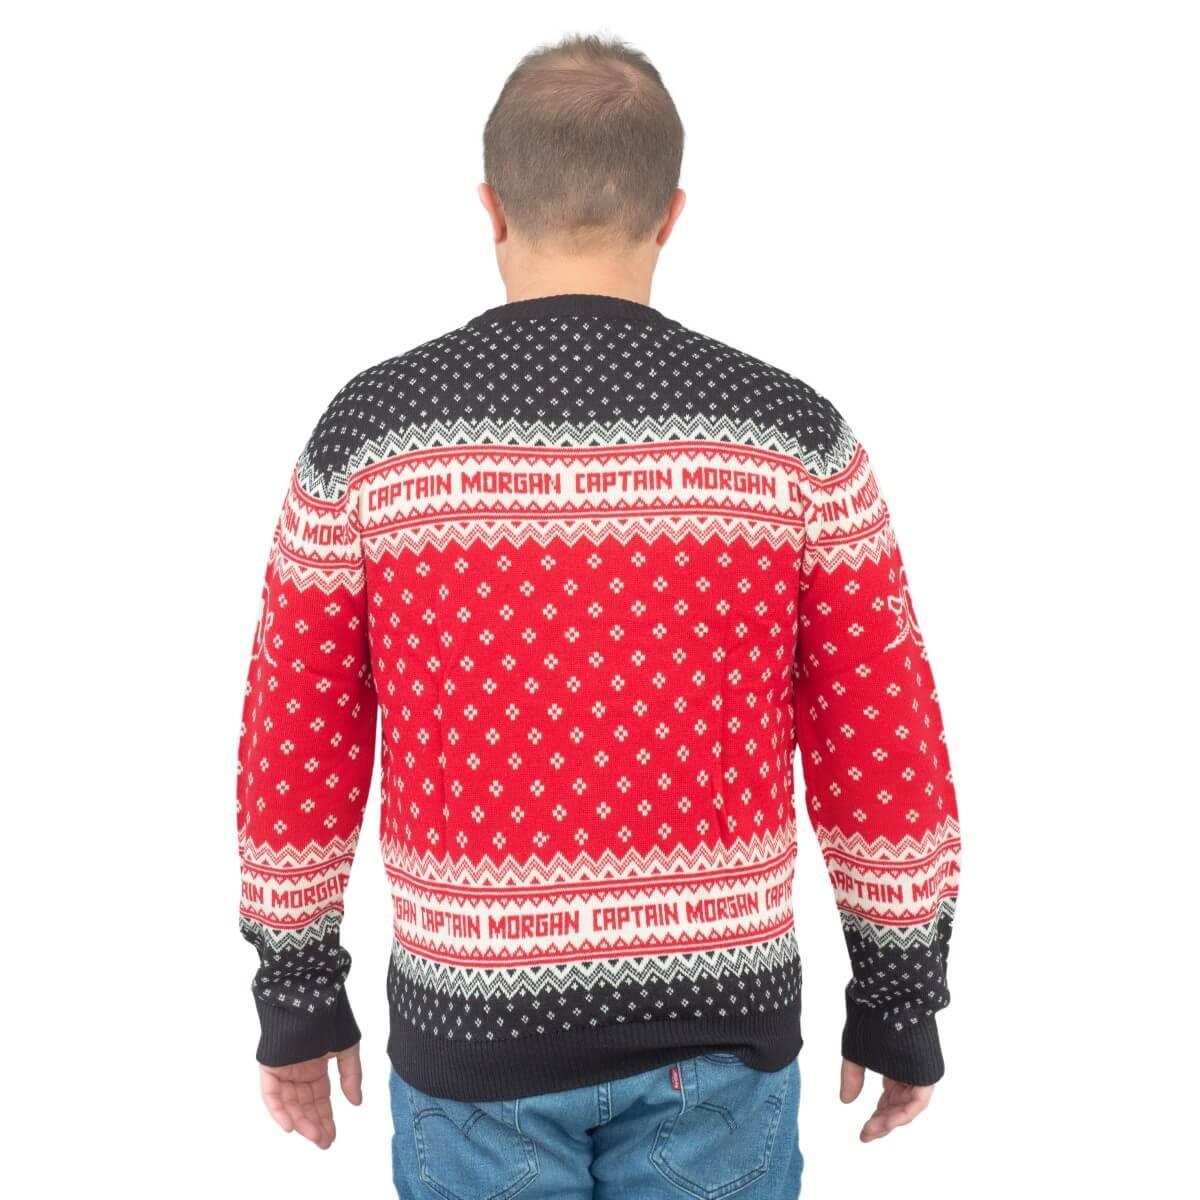 Capitain Morgan The Standing Captain Ugly Christmas Sweater-1